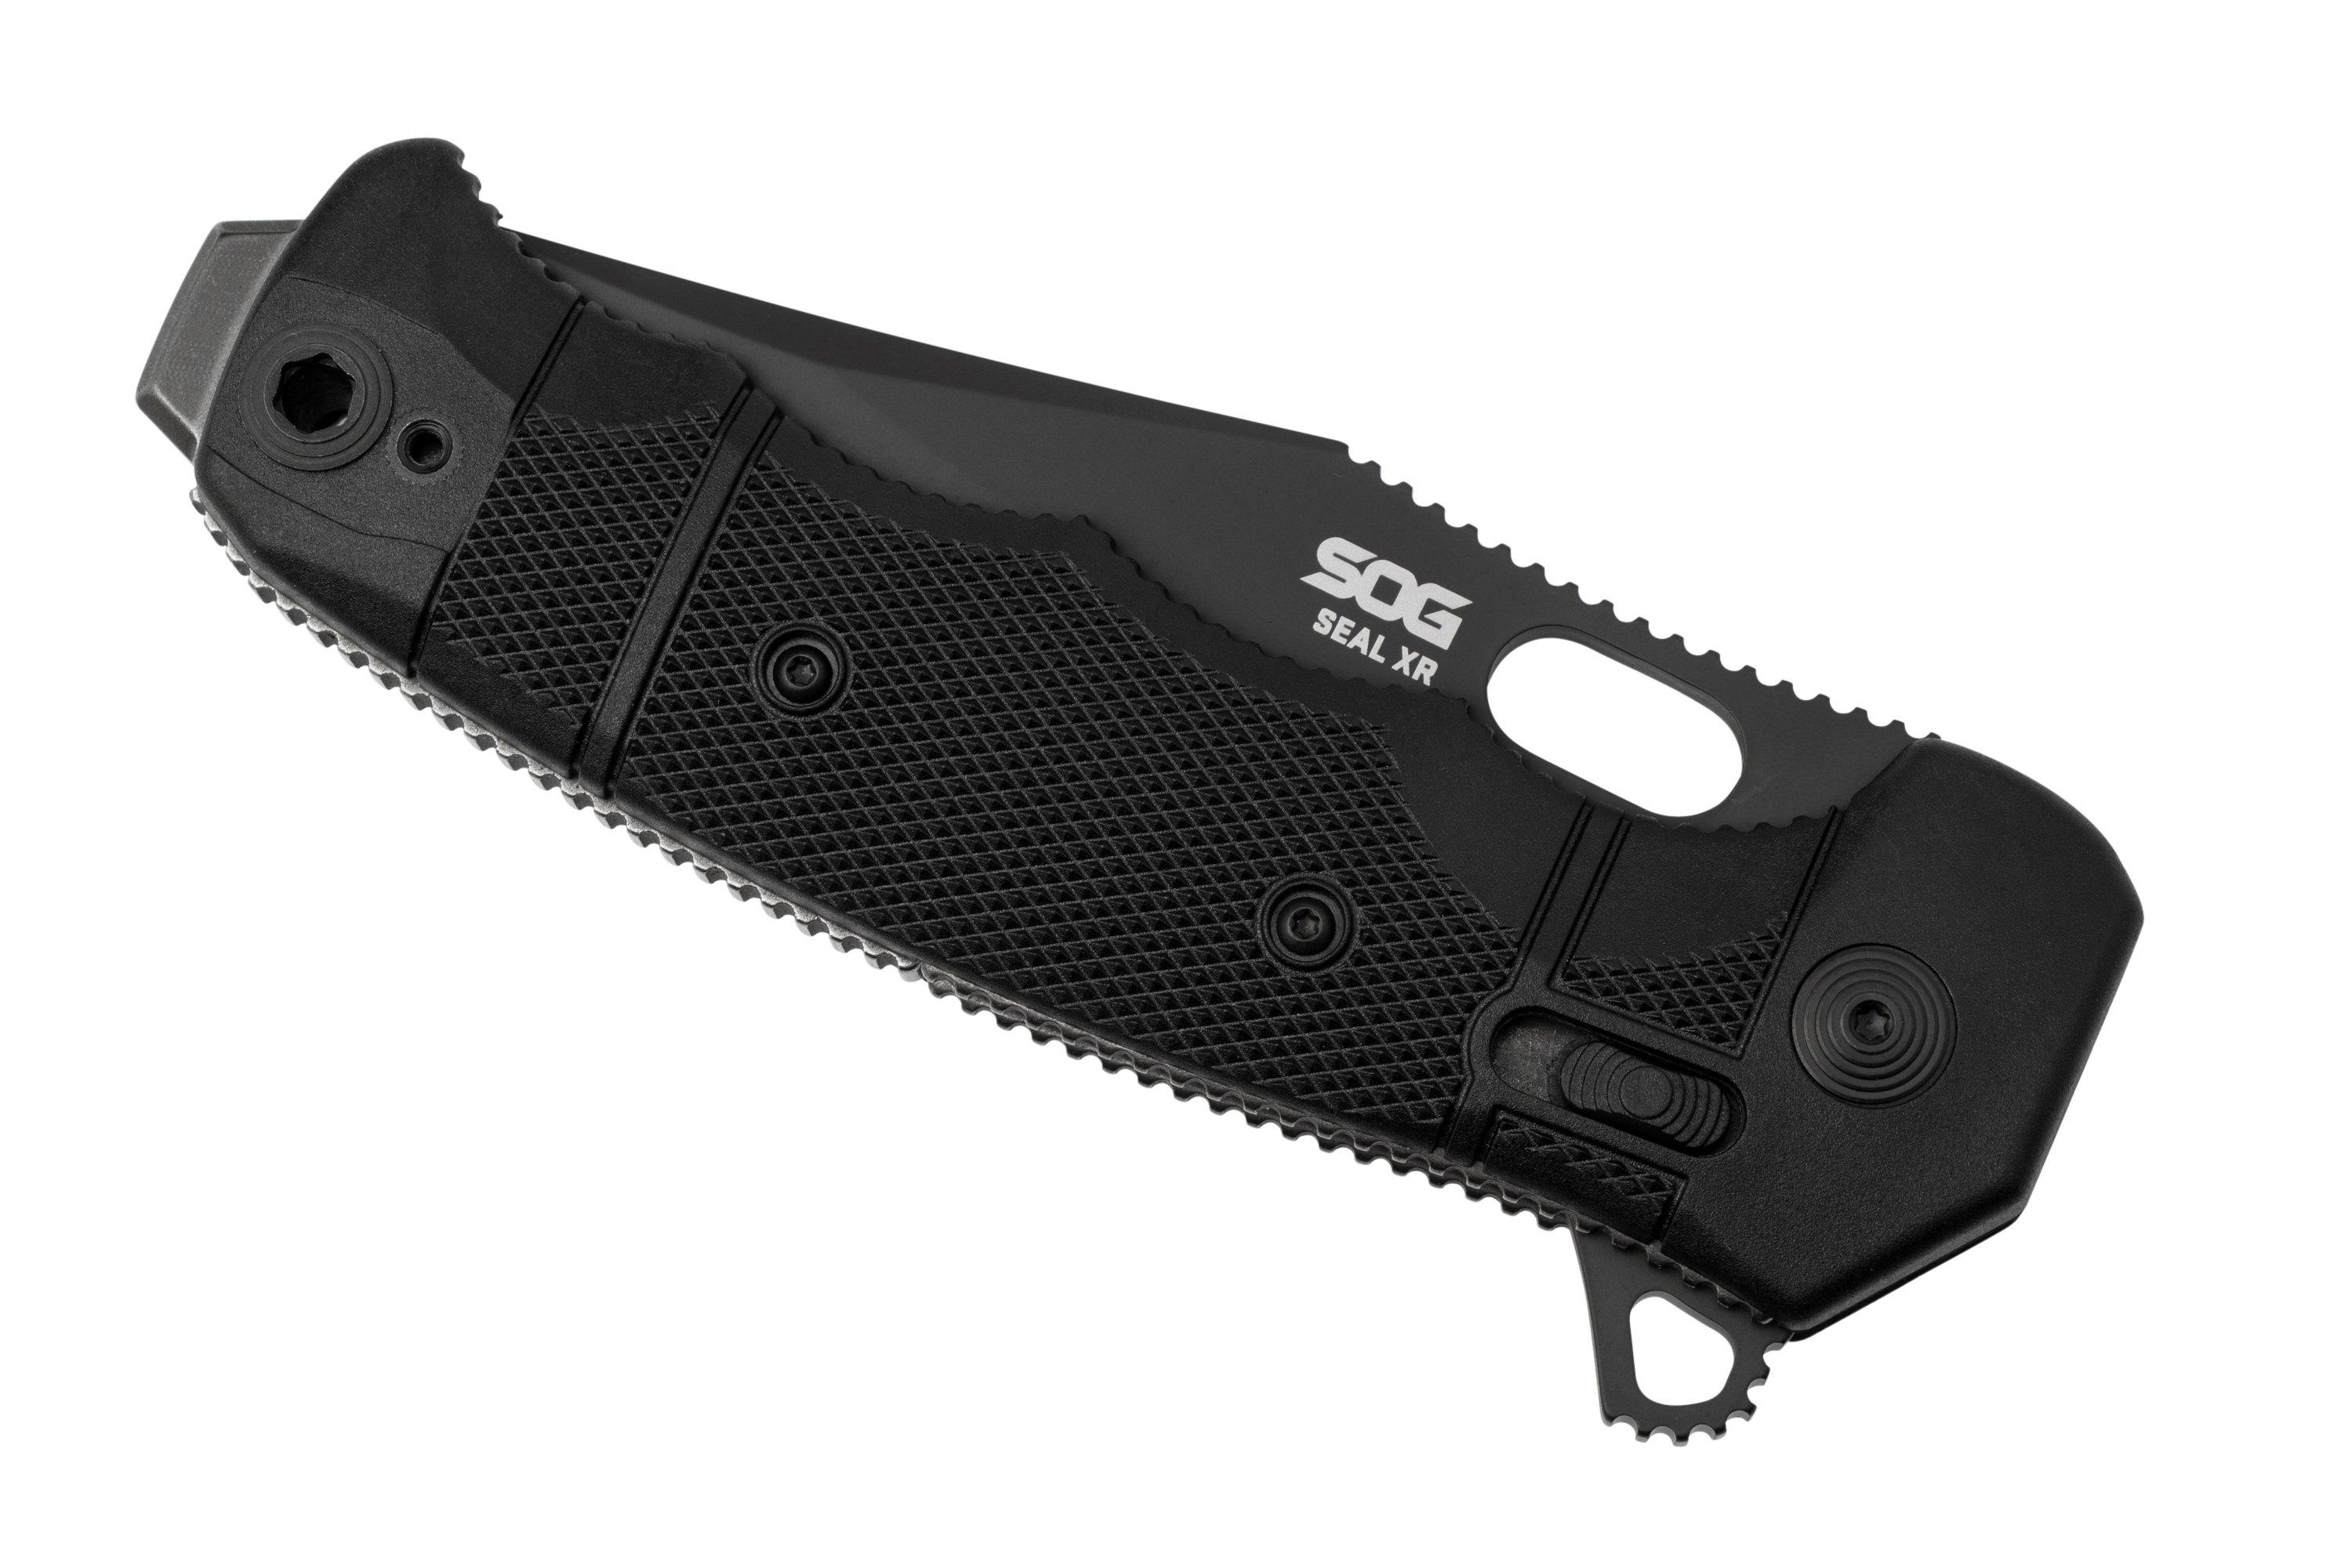 SOG SEAL XR-PARTIALLY SERRATED USA製 新品未使用品 12-21-05-57 